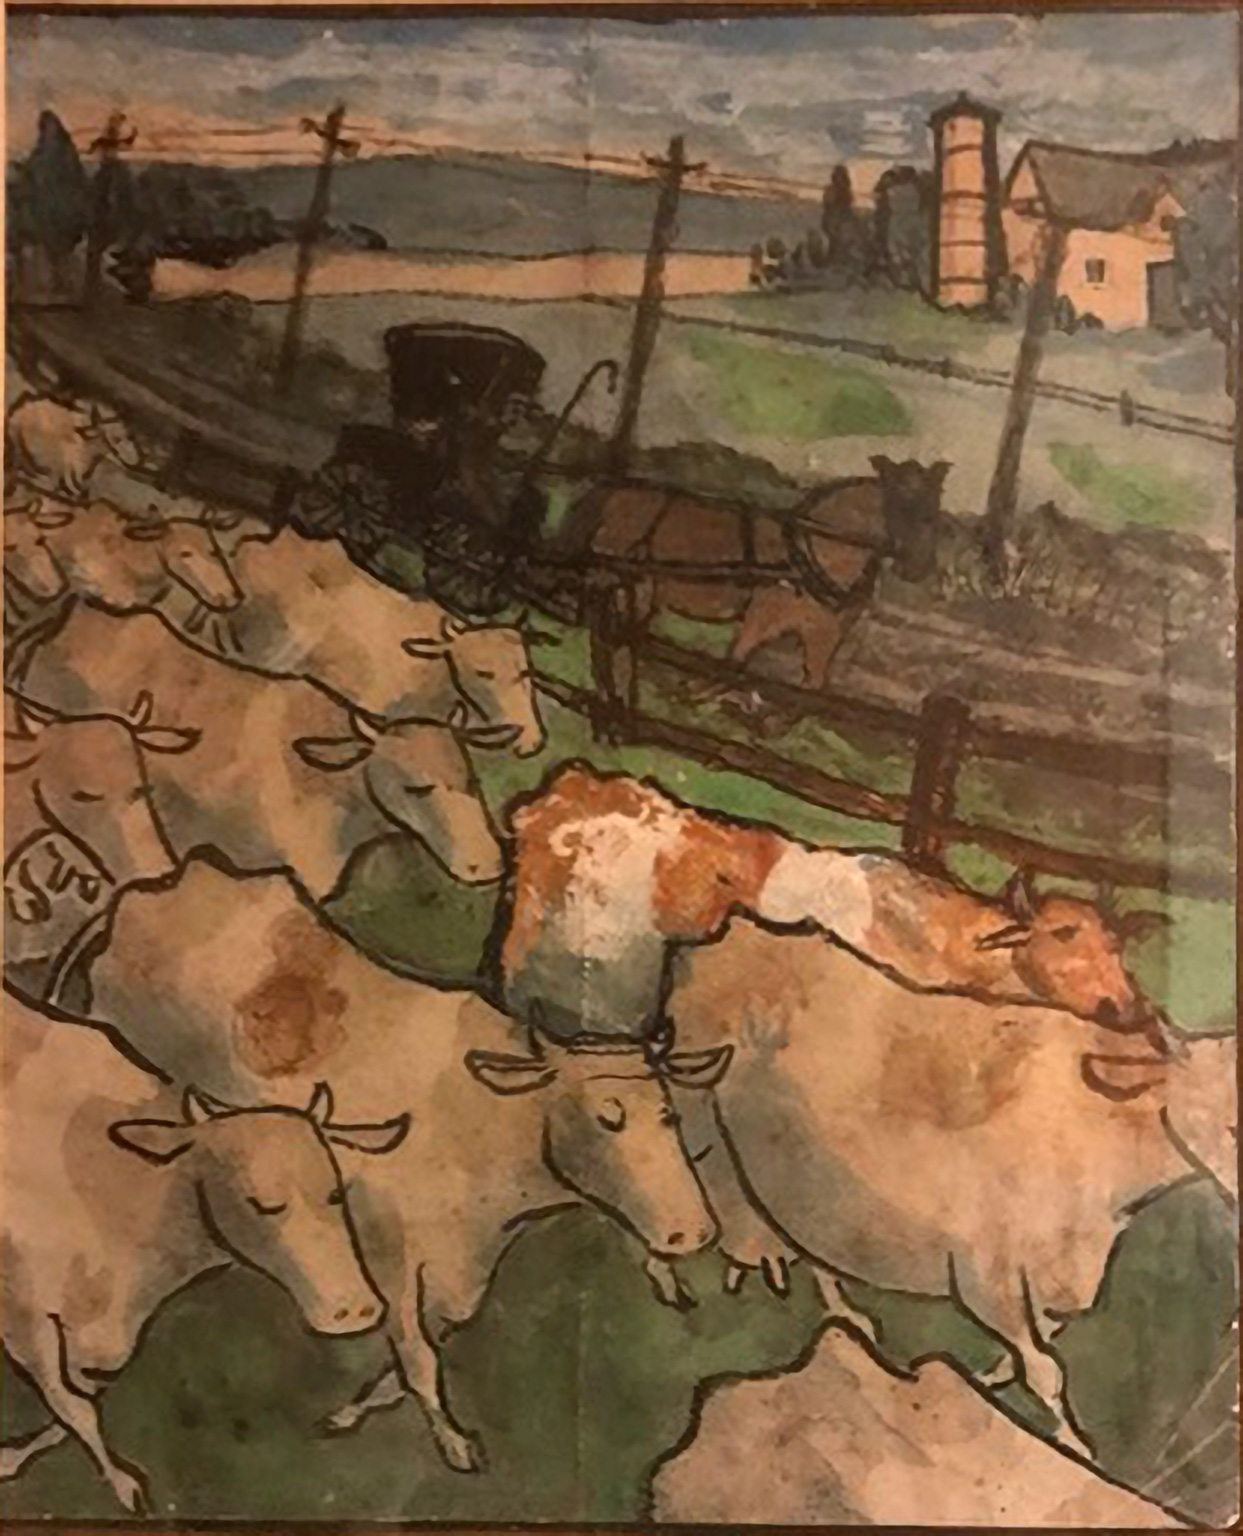 According to Jeff Wells: “Howard, Herman, and Heifers.”  Herman was the horse we had summer of ’63. It’s a New Yorker cover which Frankie Pop altered.